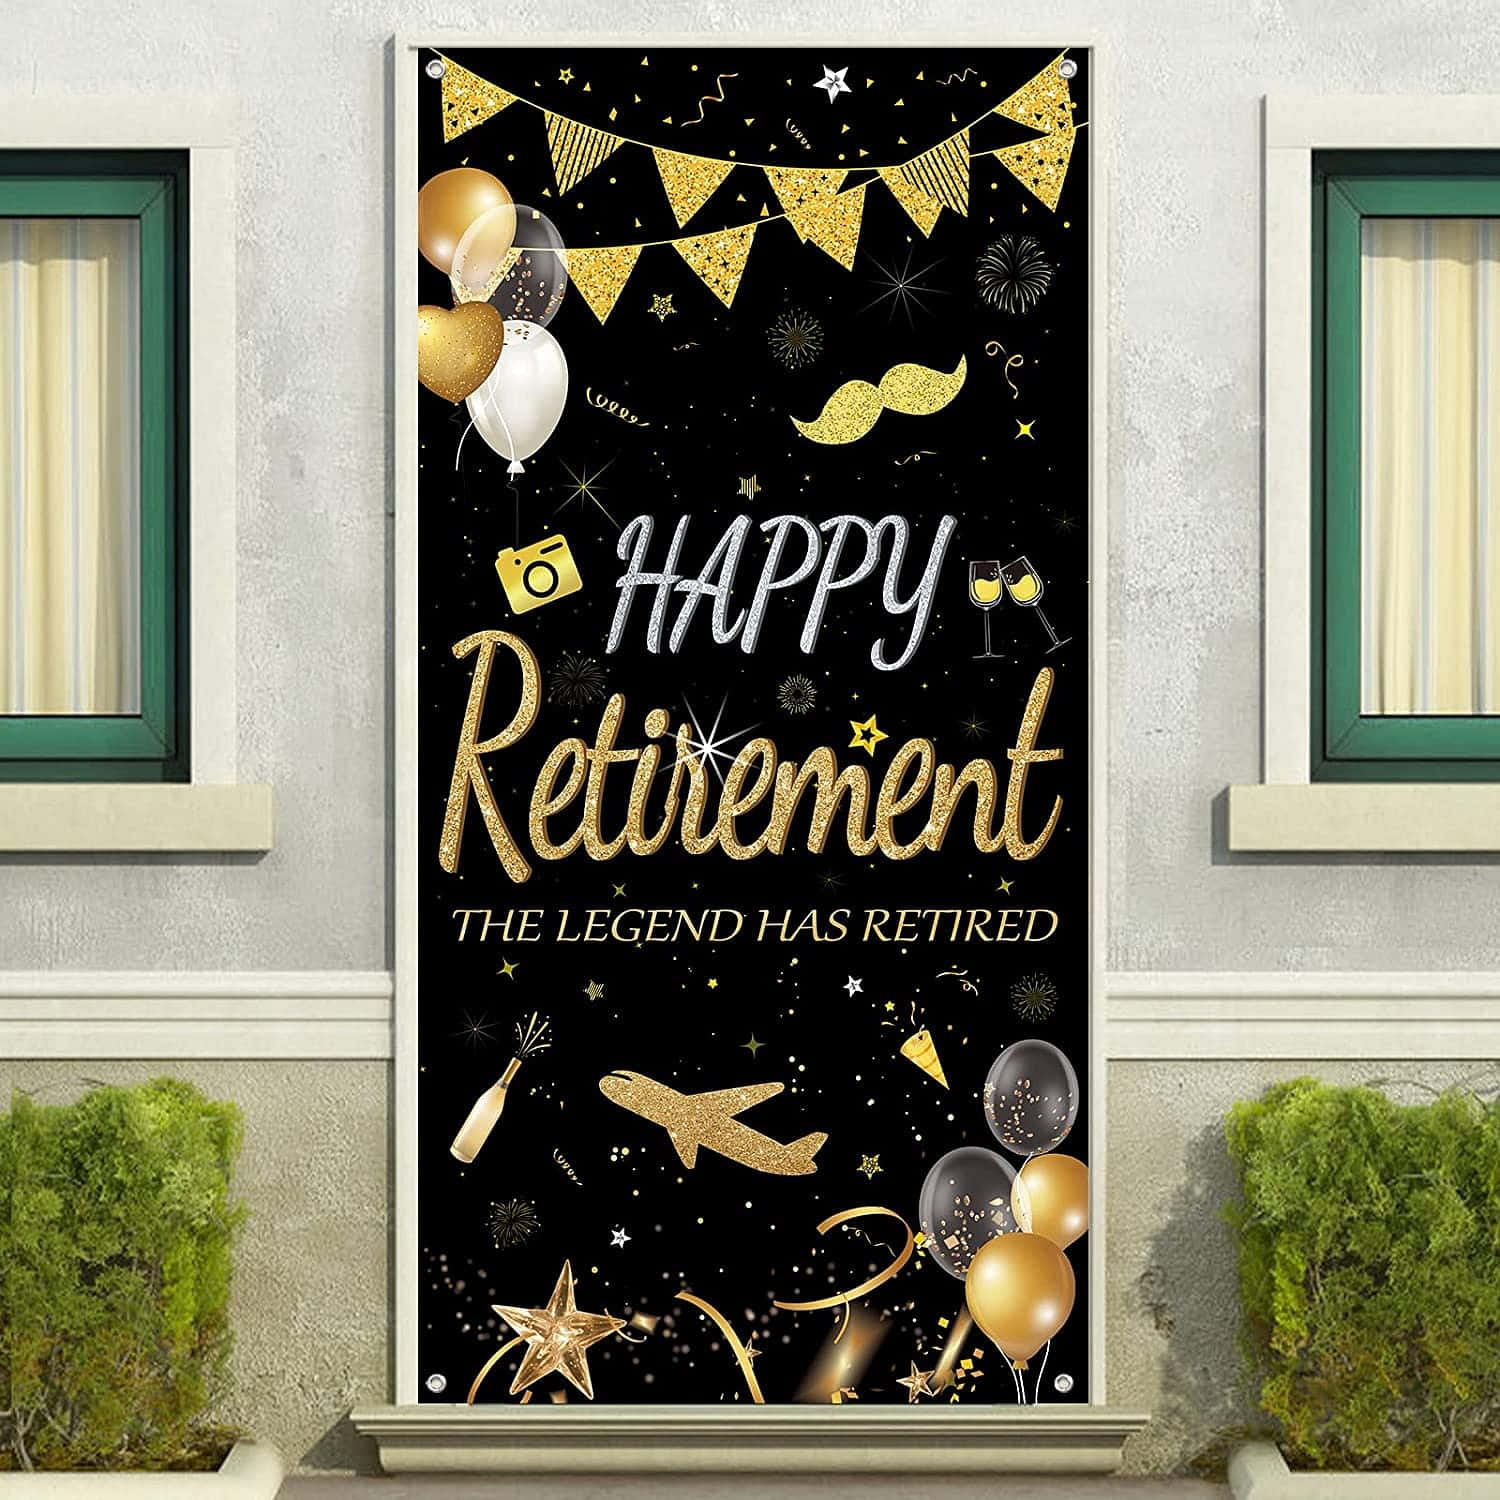 "It's time to celebrate retirement!"